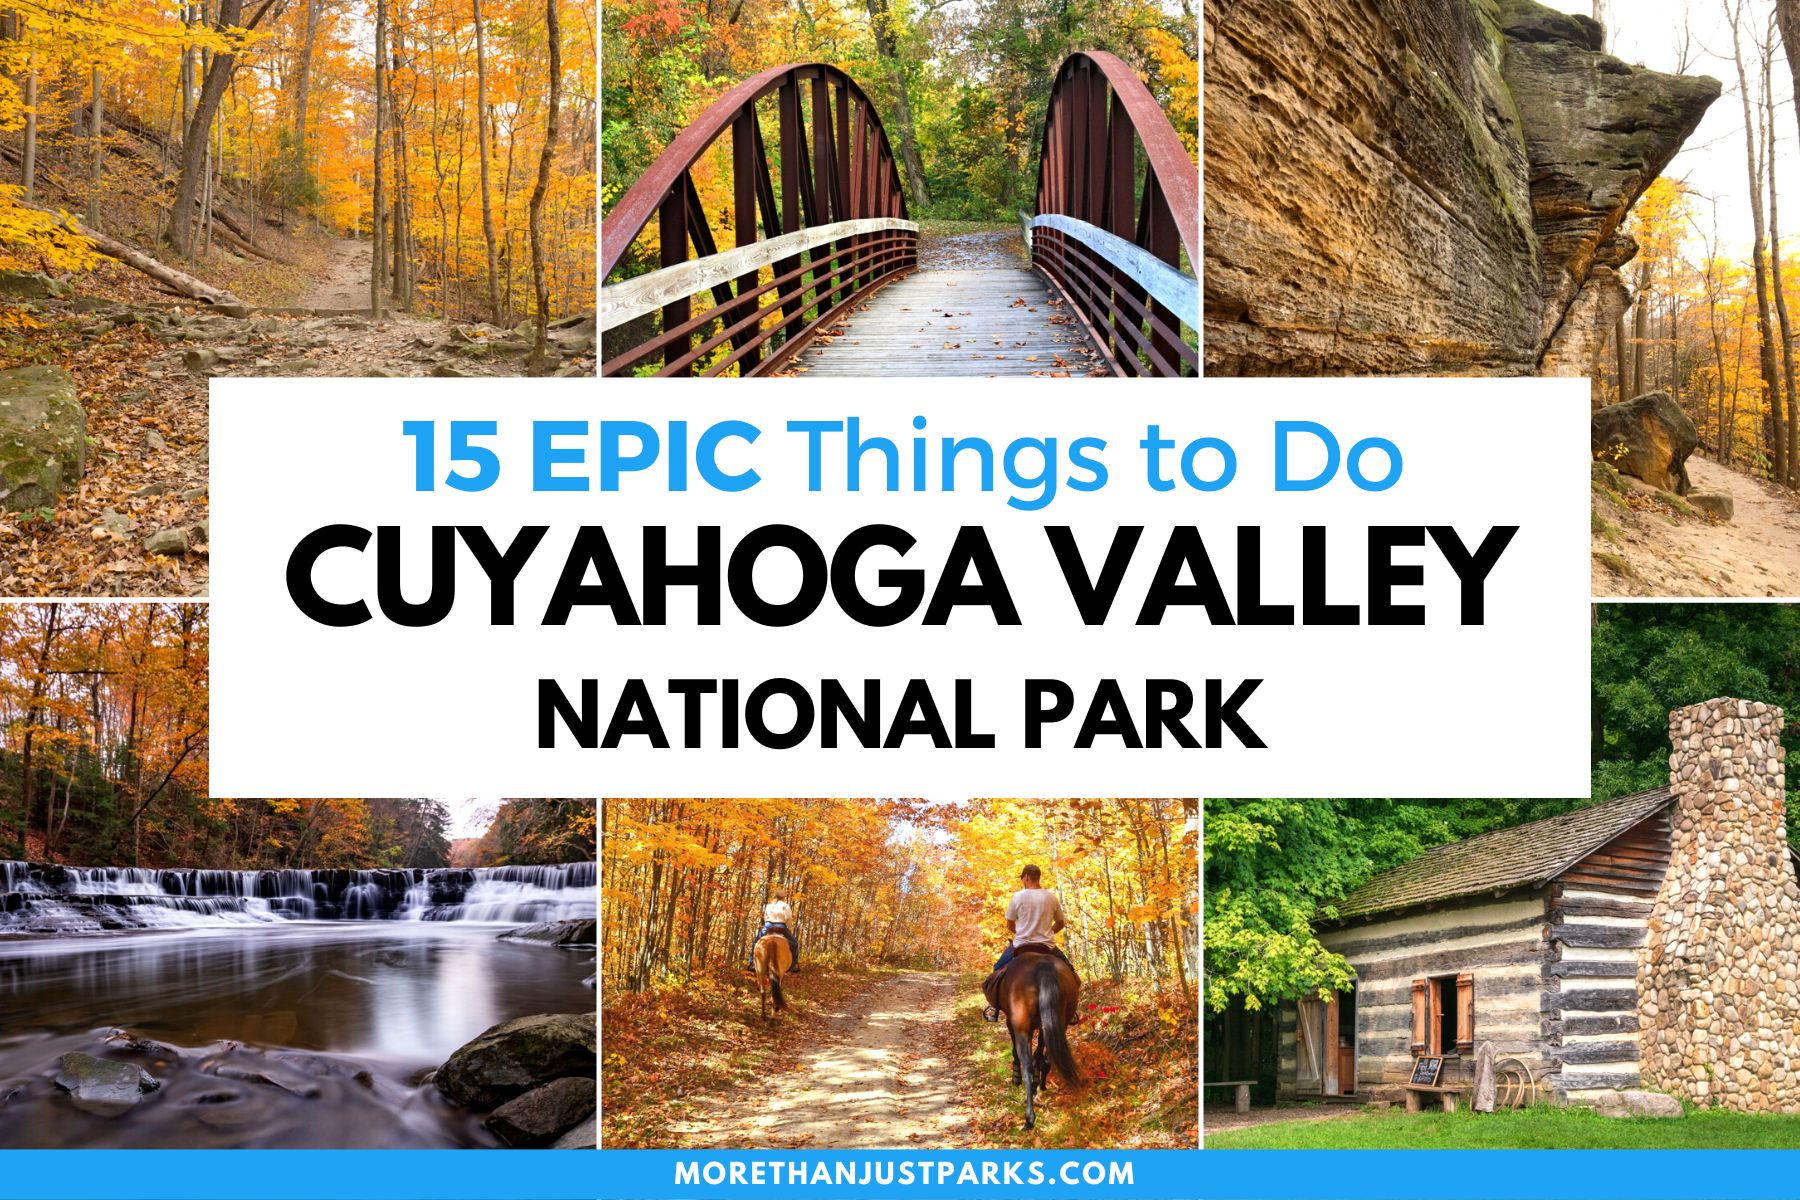 things to do cuyahoga valley national park, things to do cuyahoga valley ohio